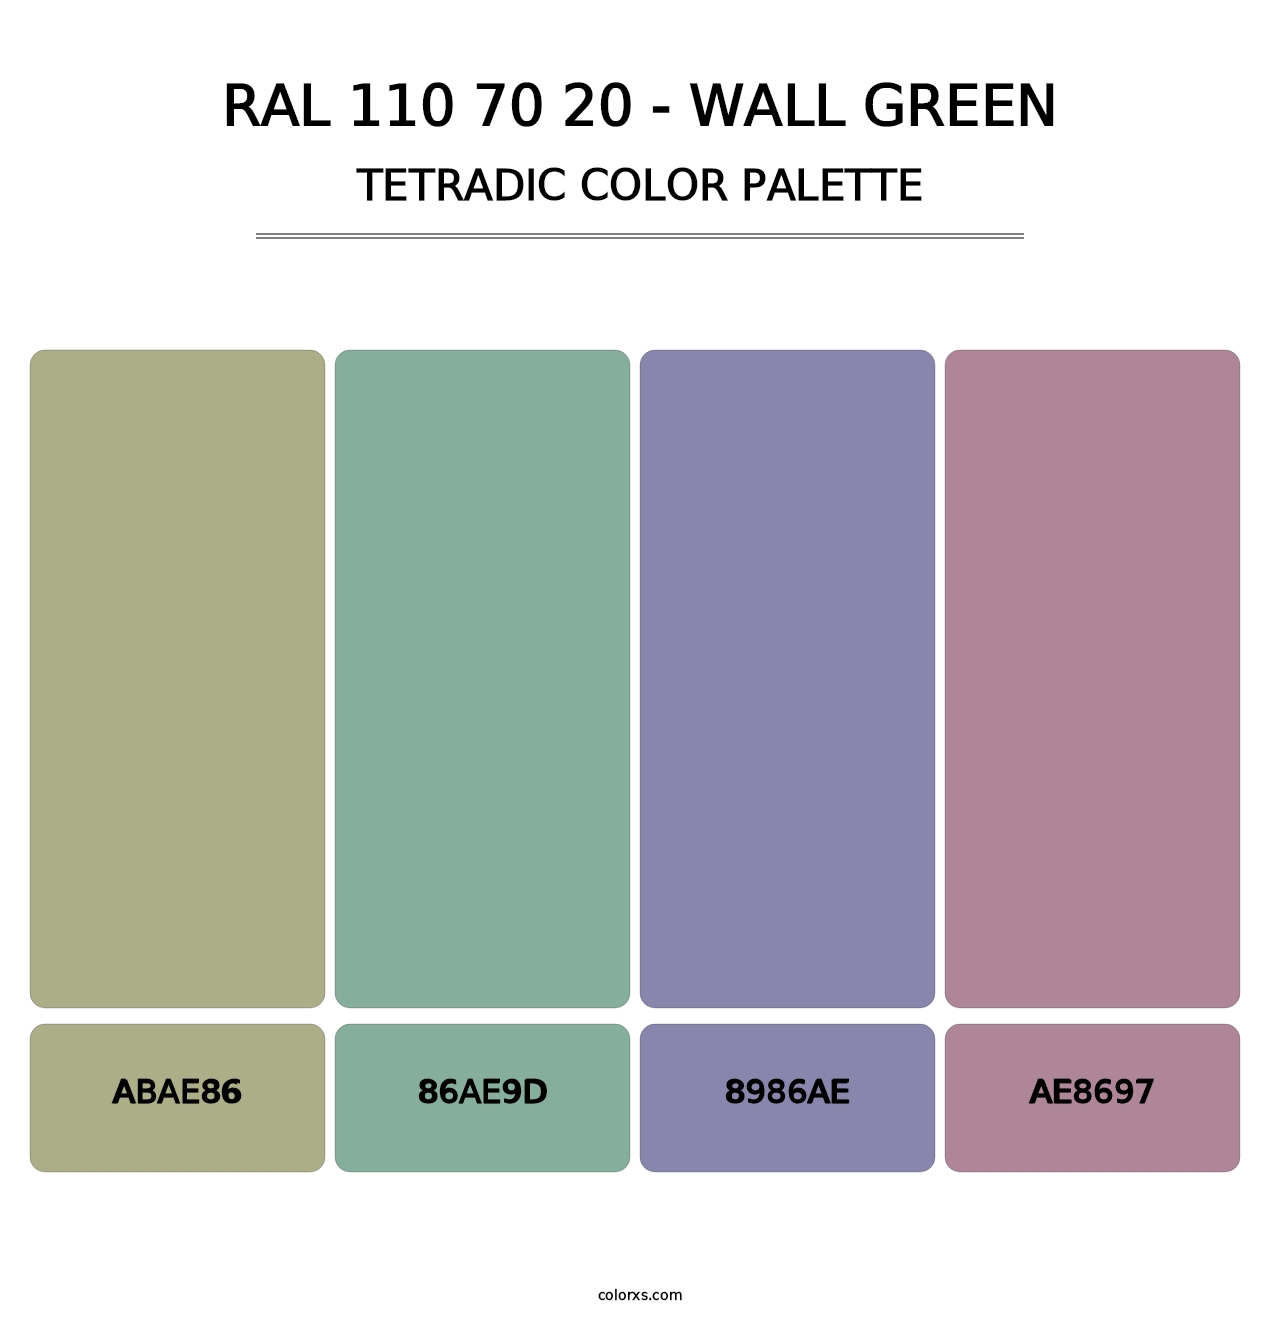 RAL 110 70 20 - Wall Green - Tetradic Color Palette